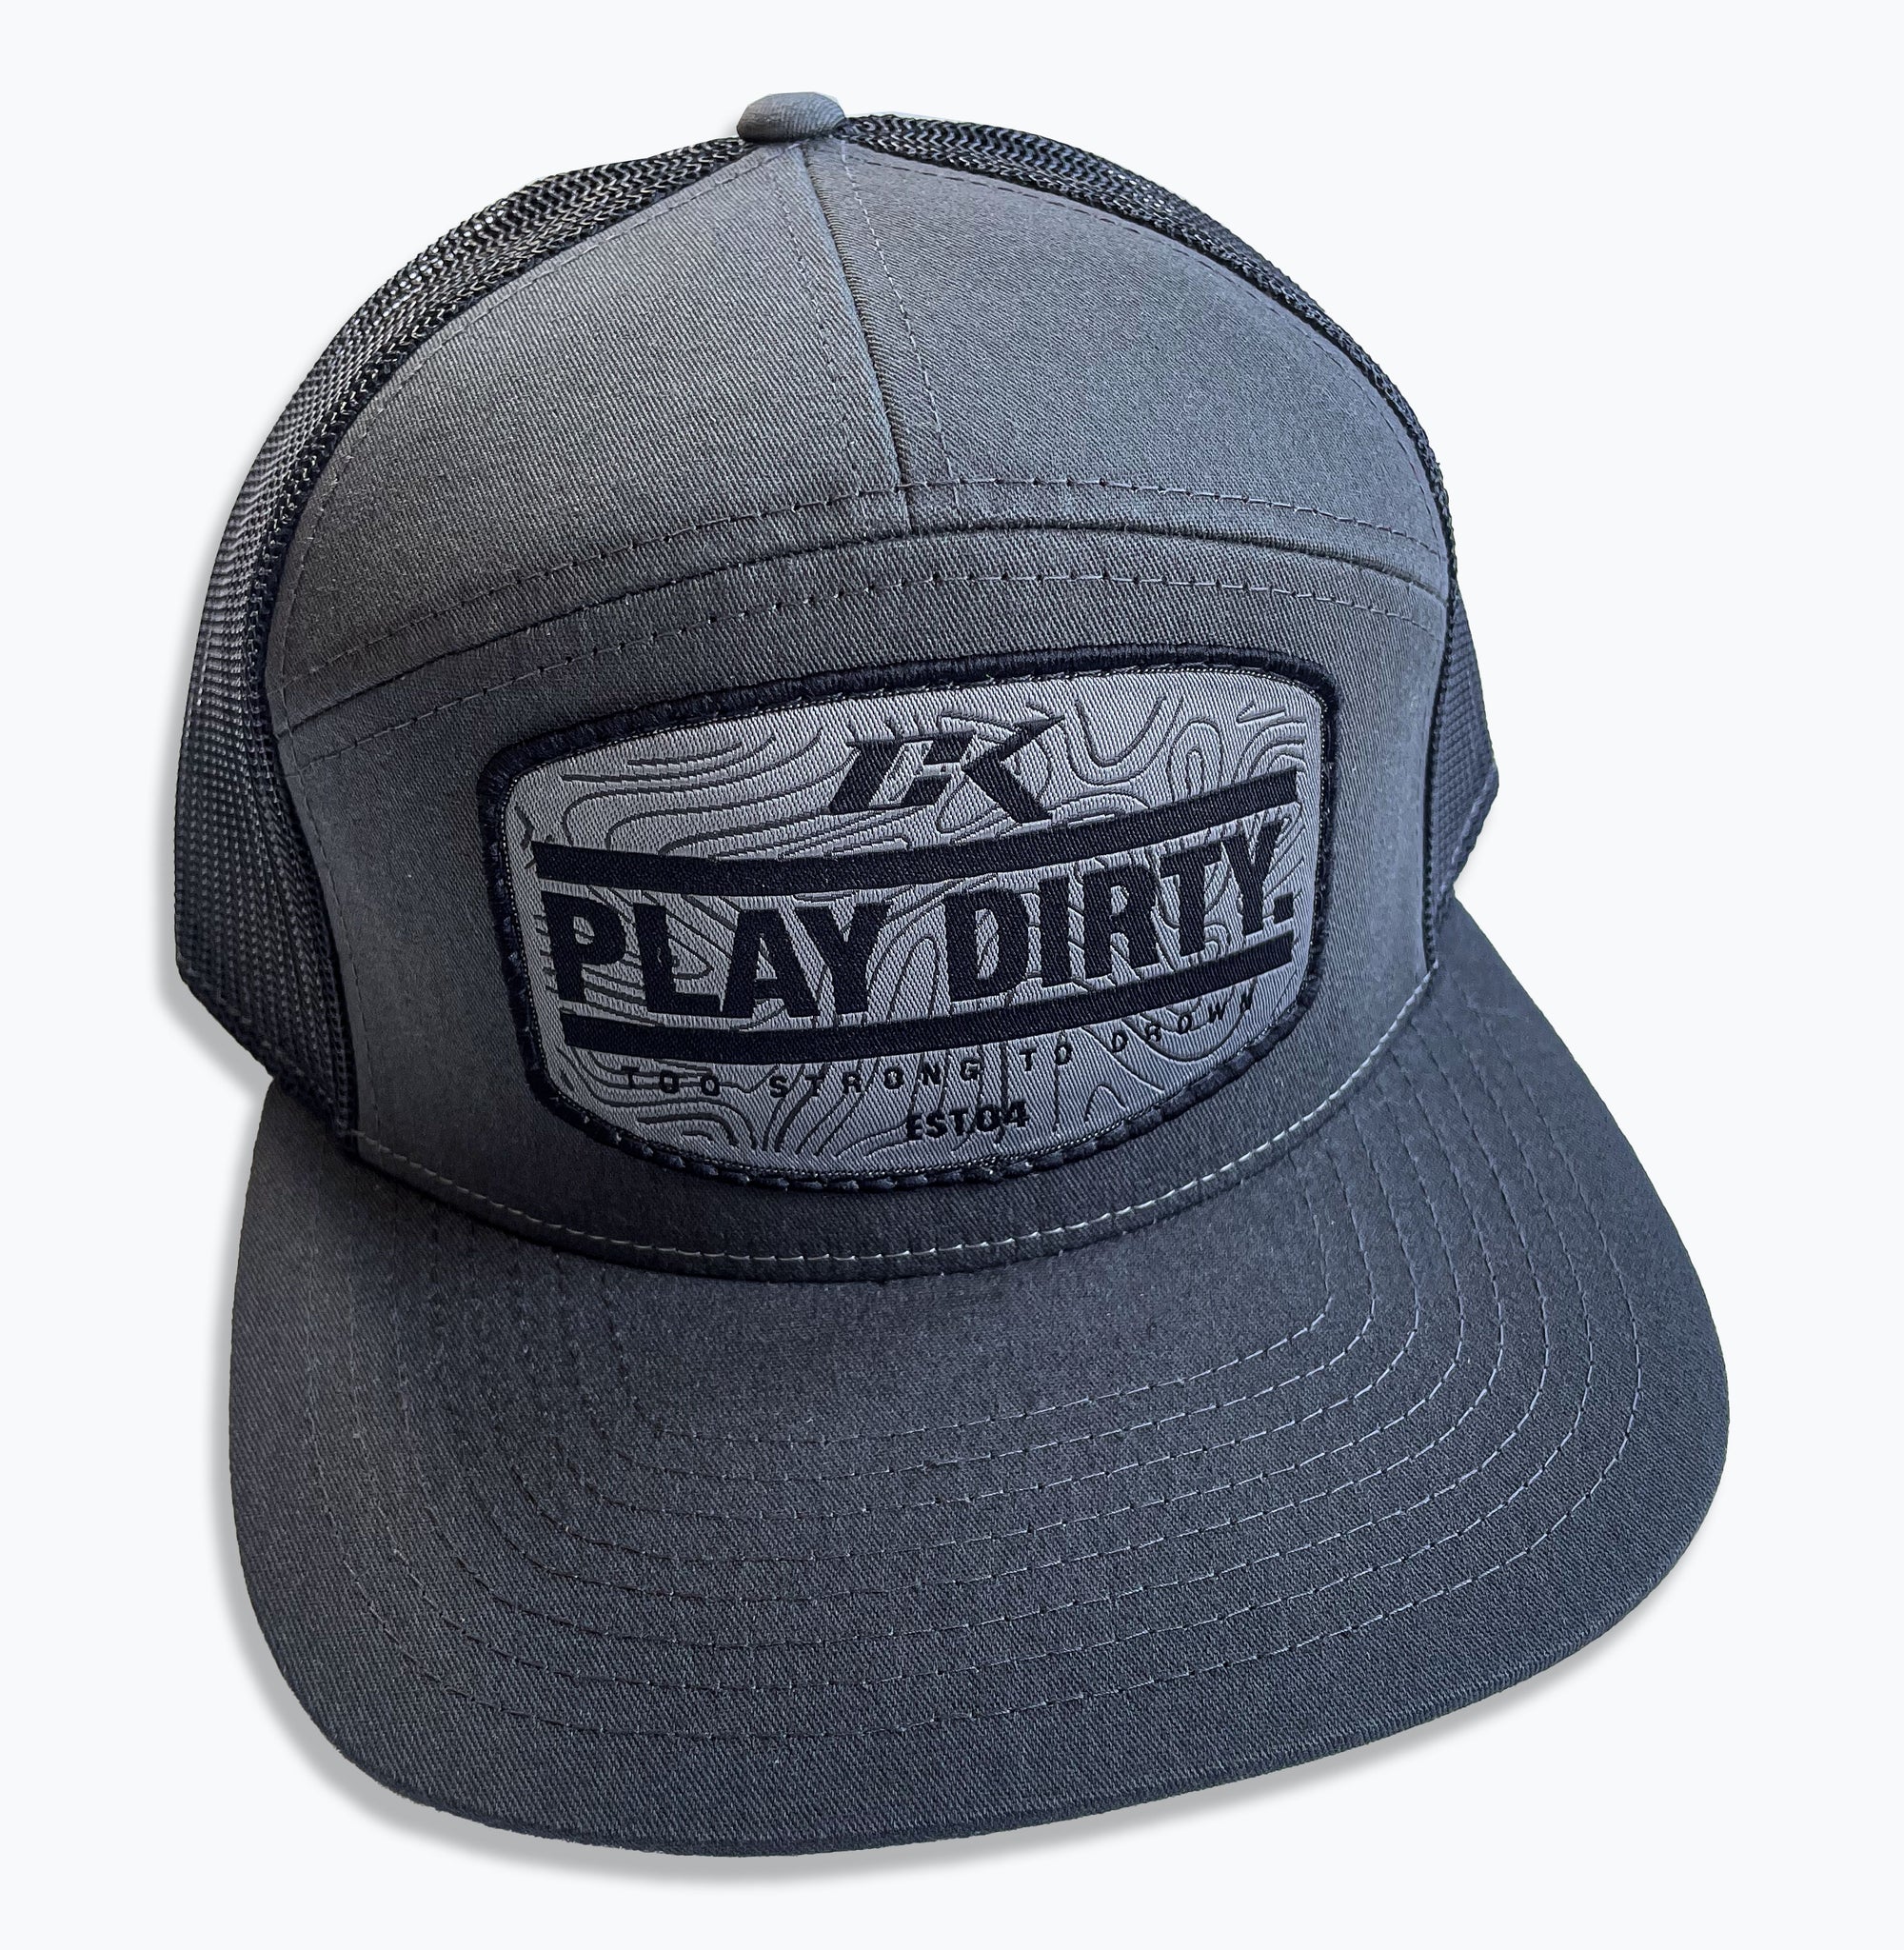 NEW CK FIGHTLIFE 7 PANEL CAP "PLAY DIRTY"